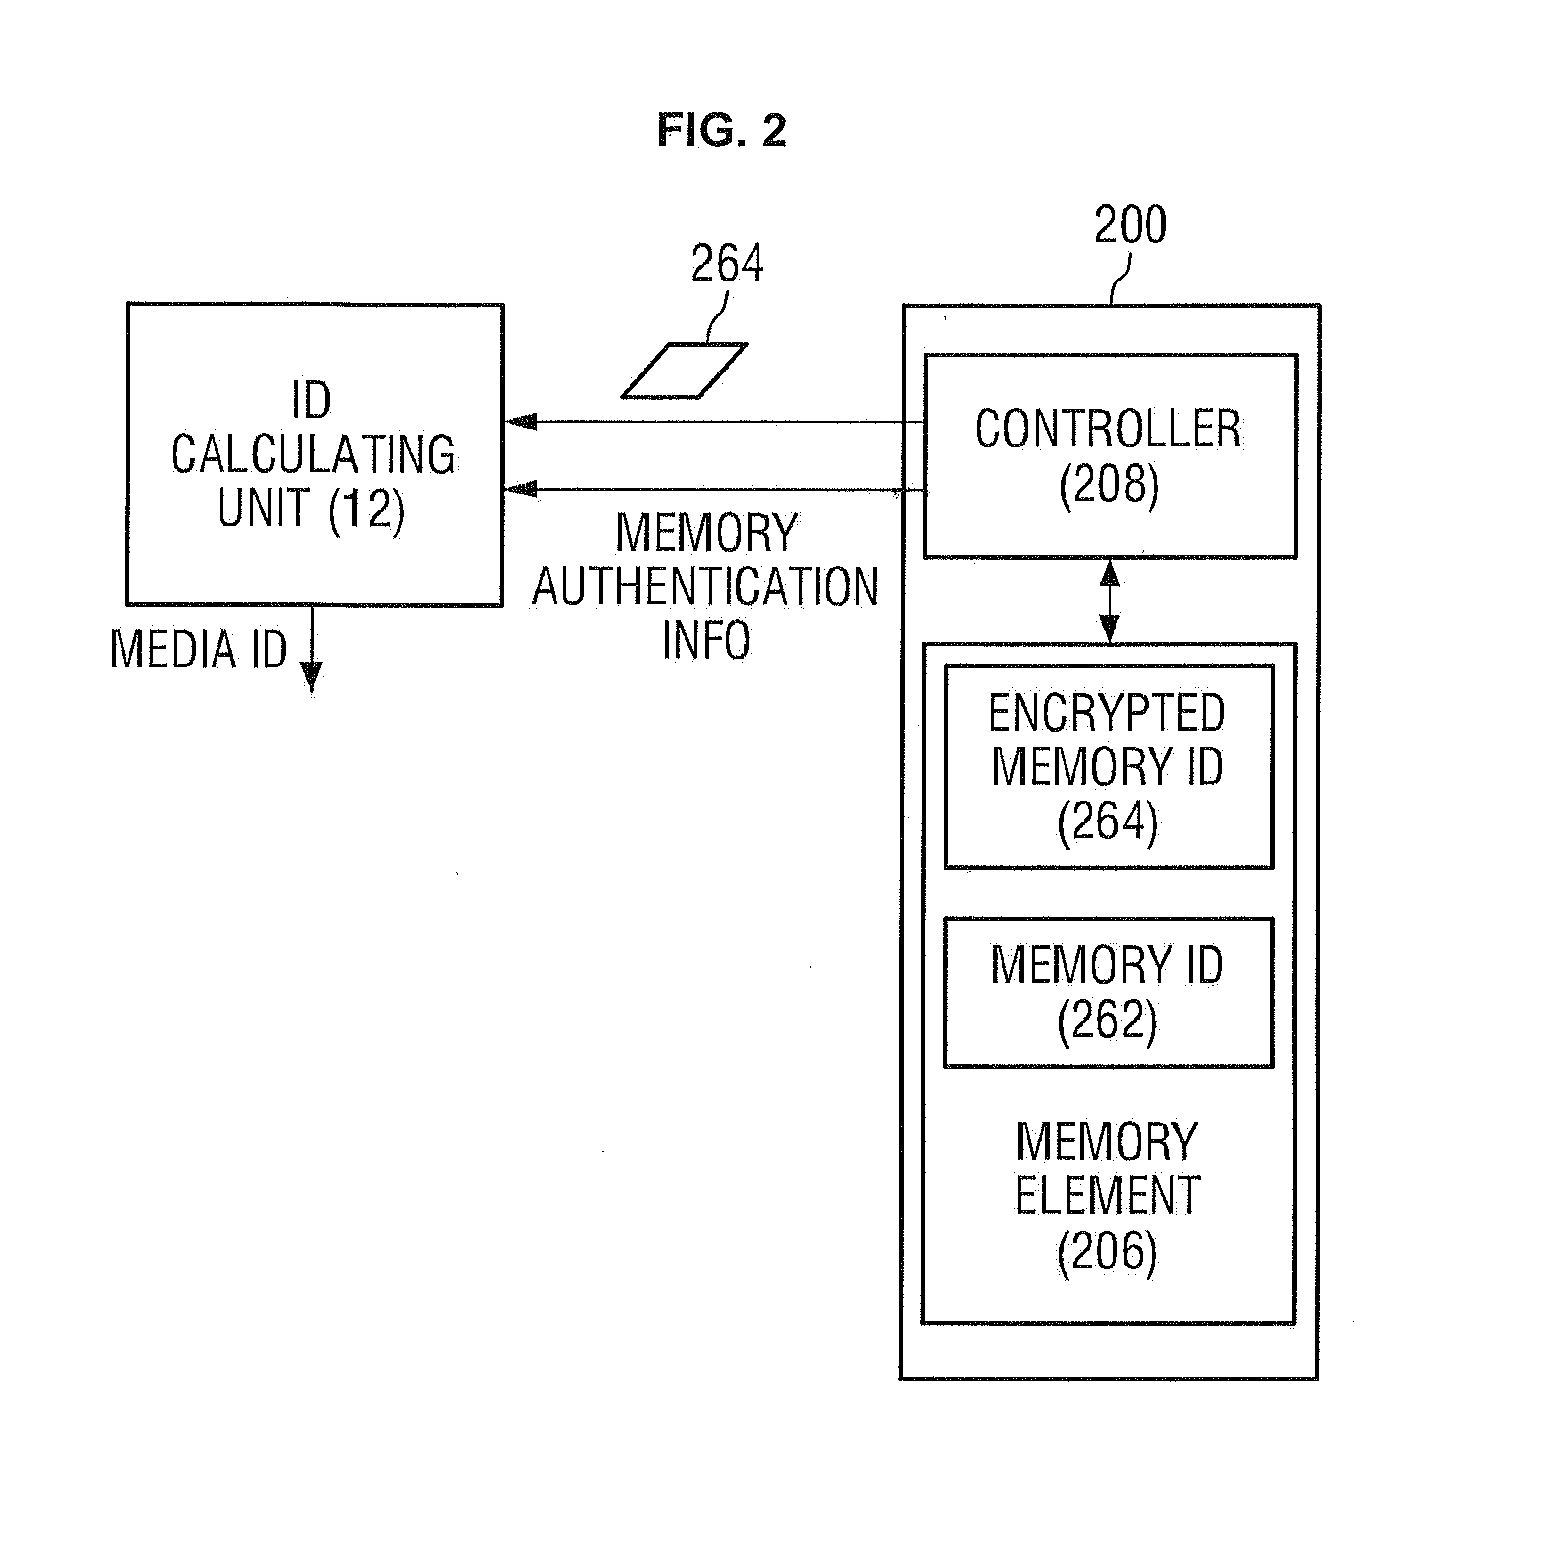 Apparatus for generating secure key using device and user authentication information